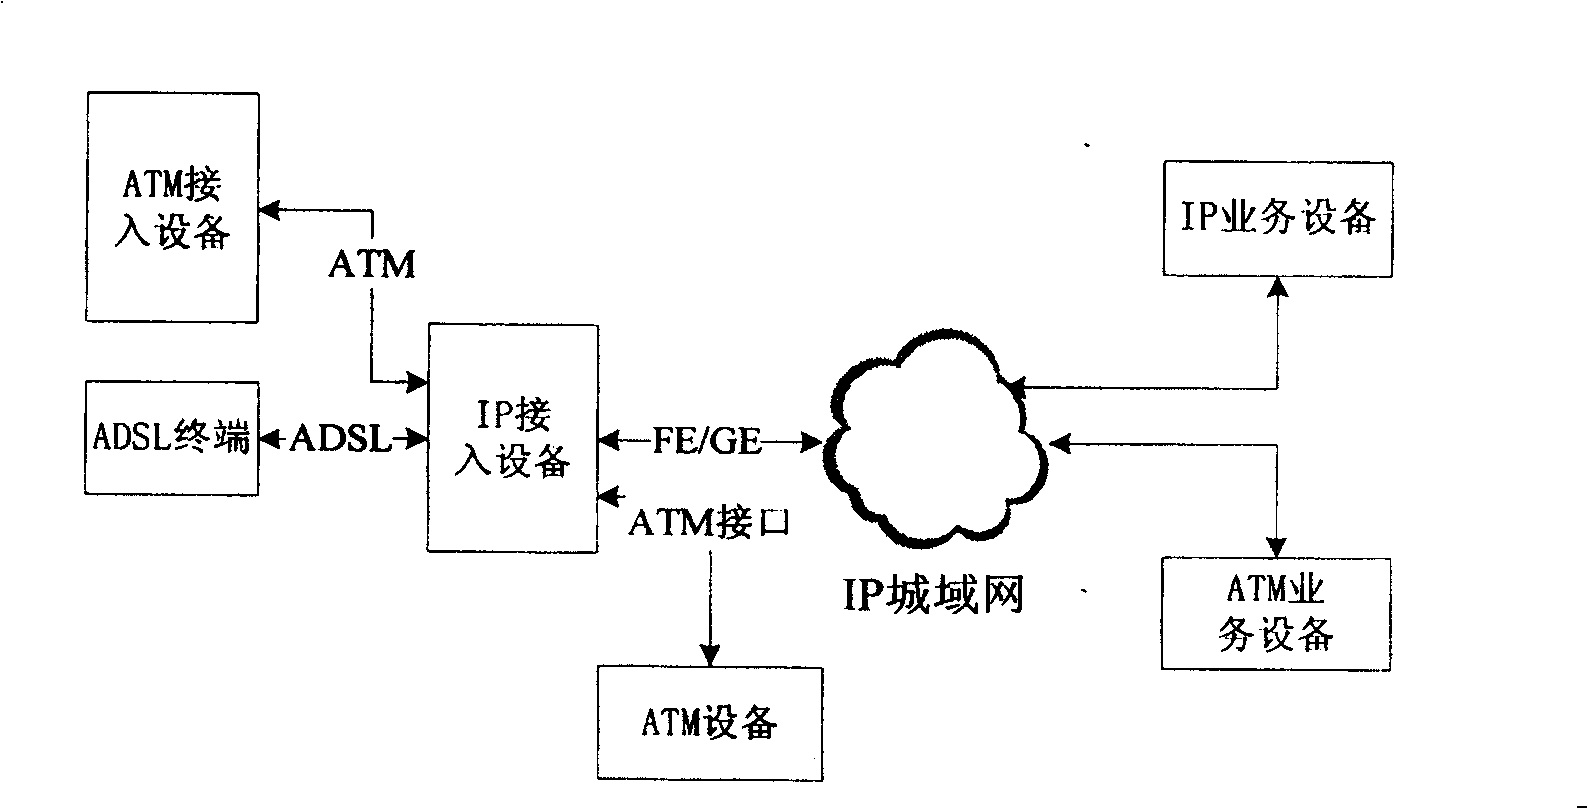 Method and device for transfer ATM service based on IP exchanger